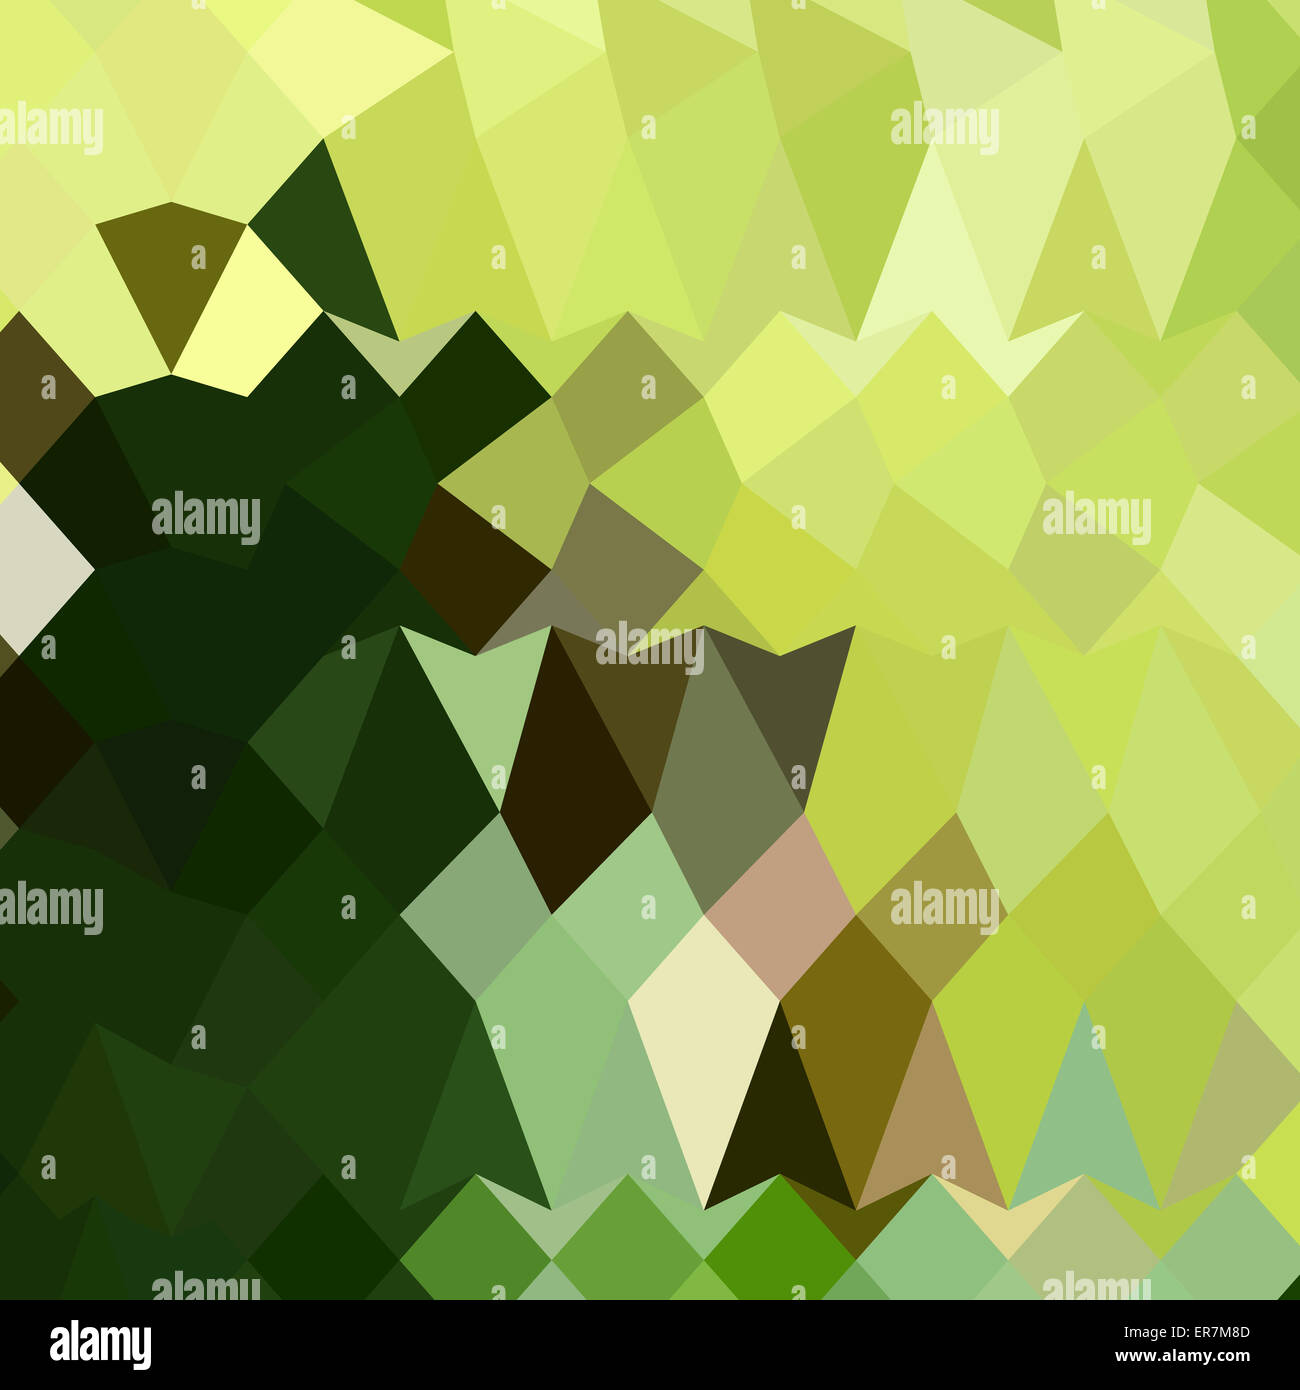 Low polygon style illustration of apple green abstract geometric background. Stock Photo